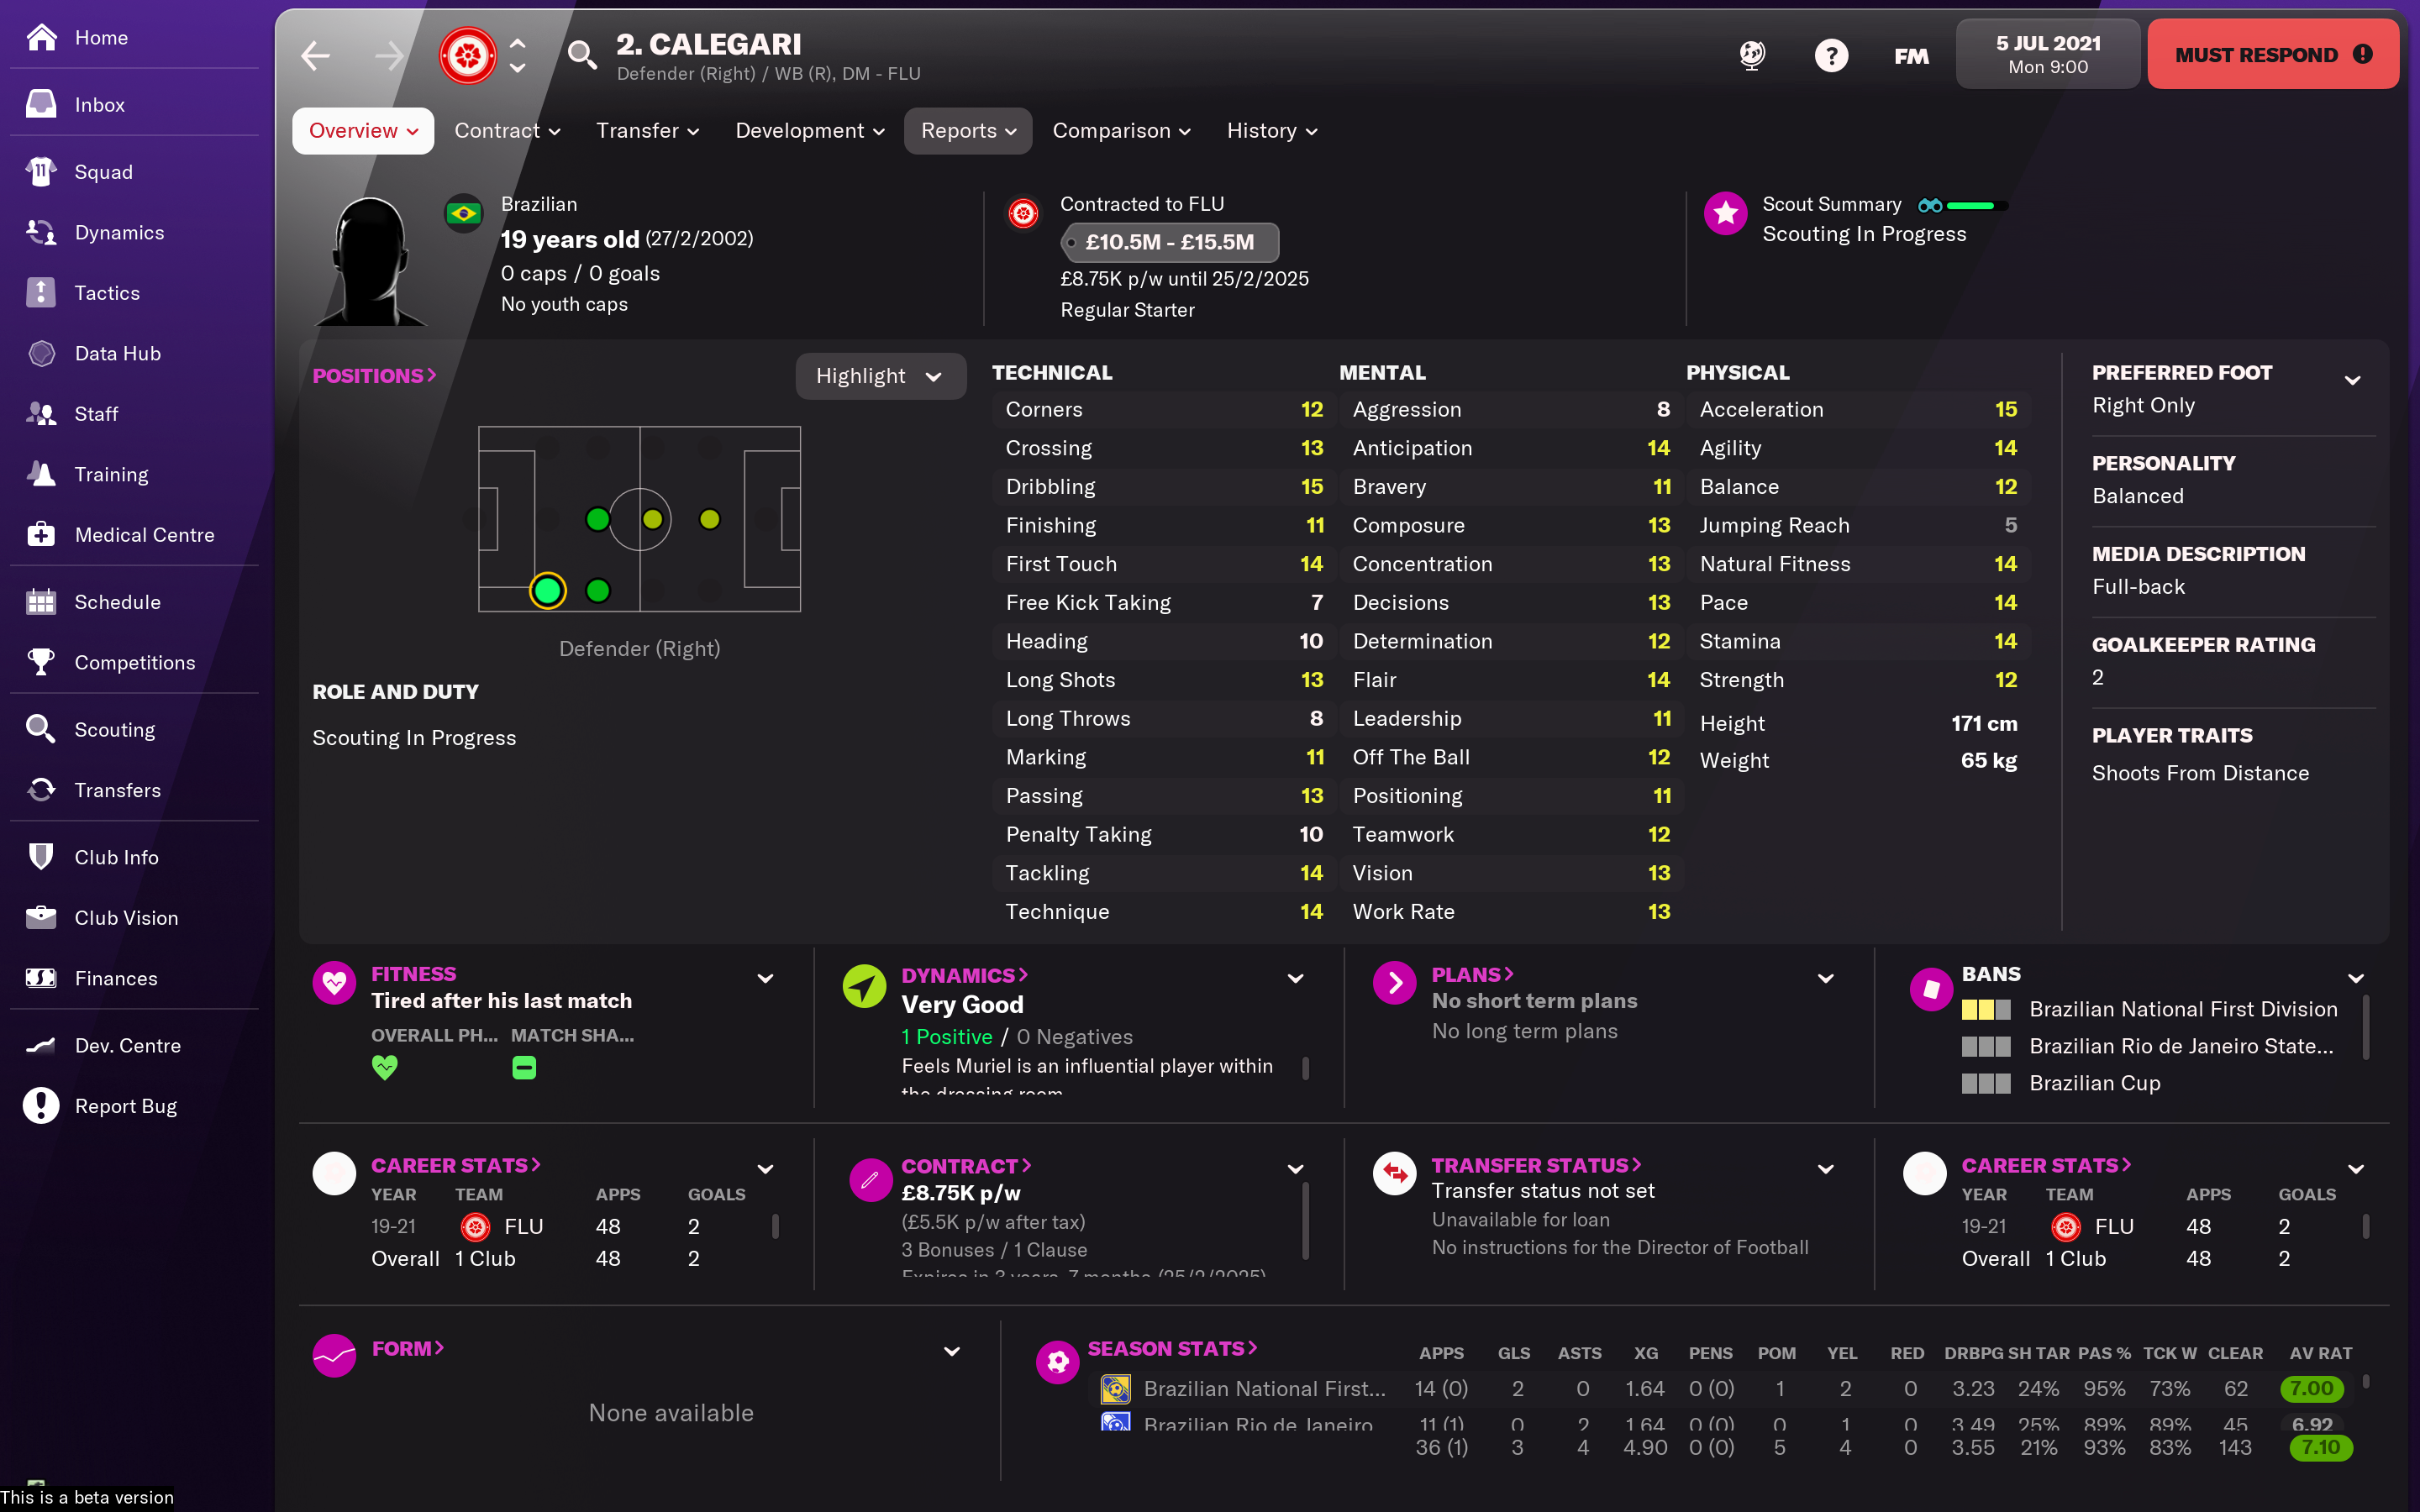 Football Manager 2022 wonderkids: The 20 best young players to sign in FM22  - The Athletic